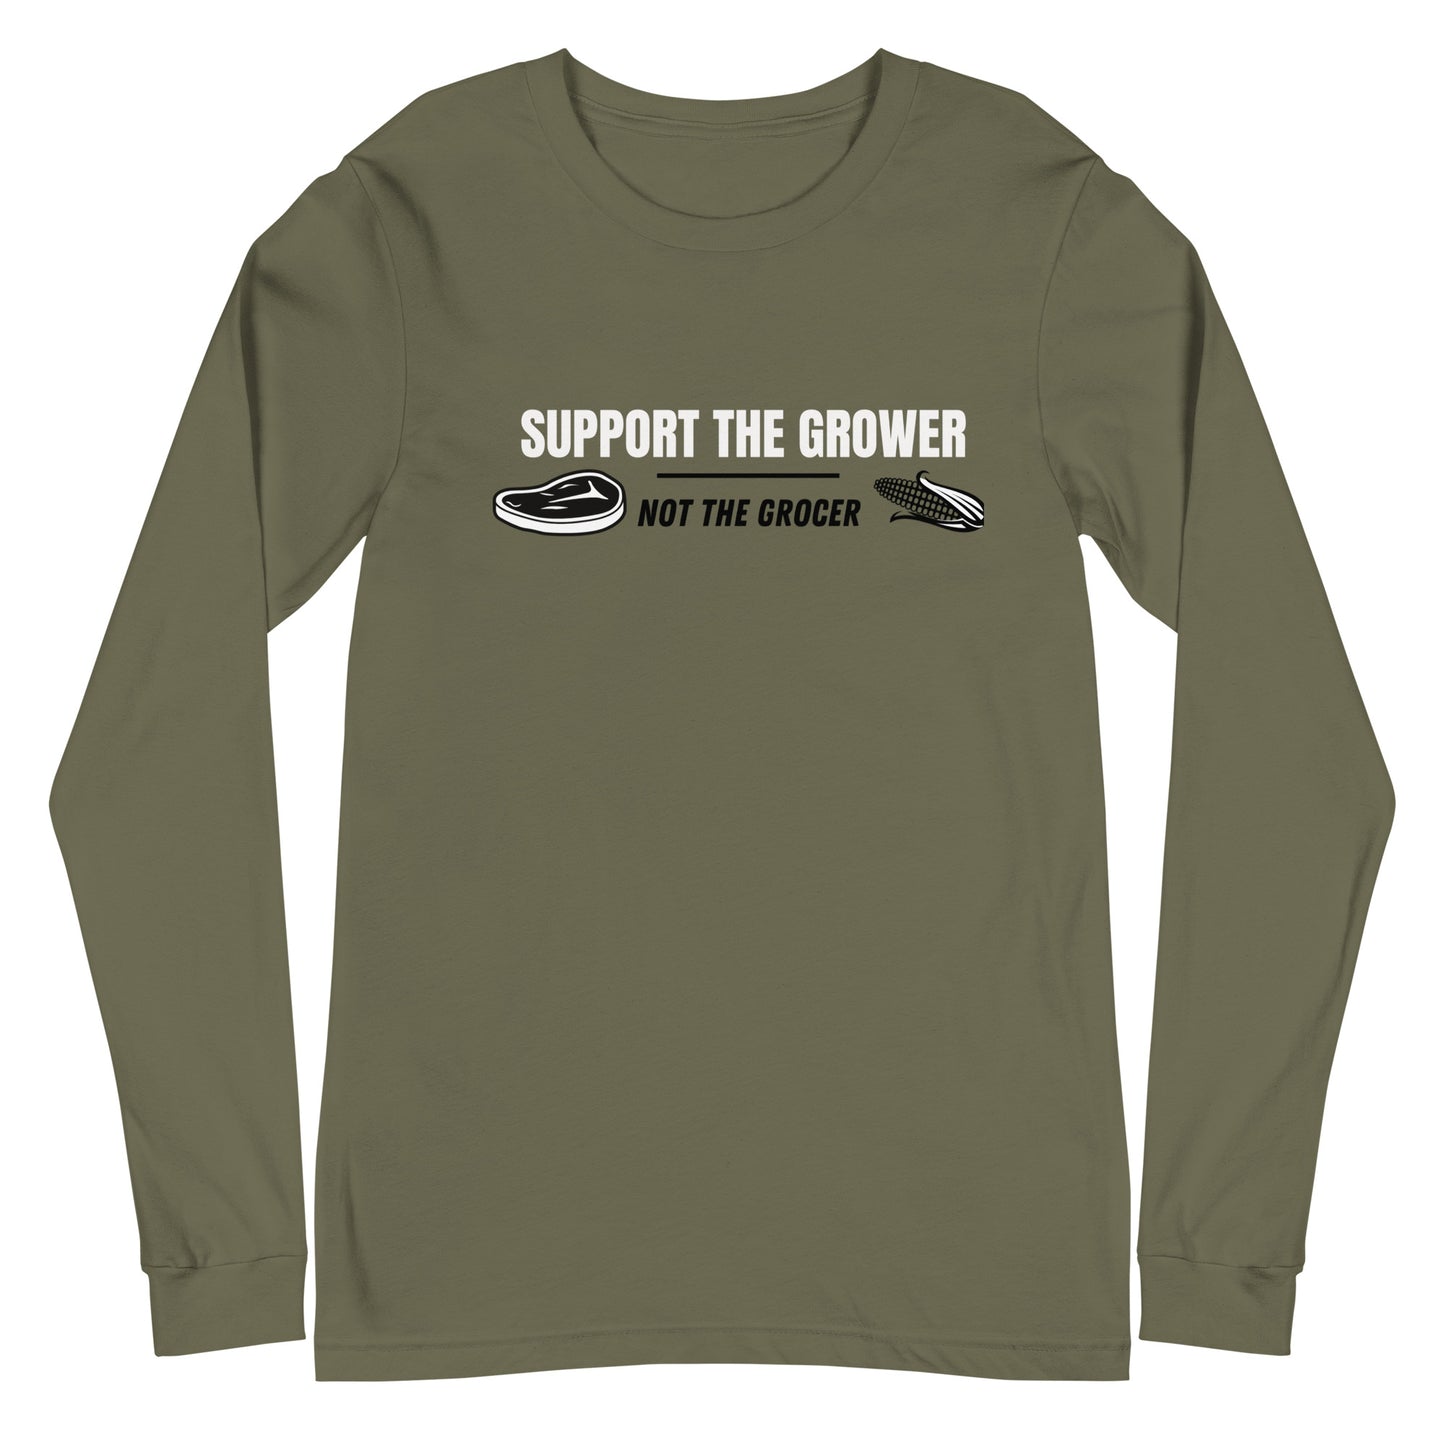 UNISEX LONG SLEEVE- NOT THE GROCER